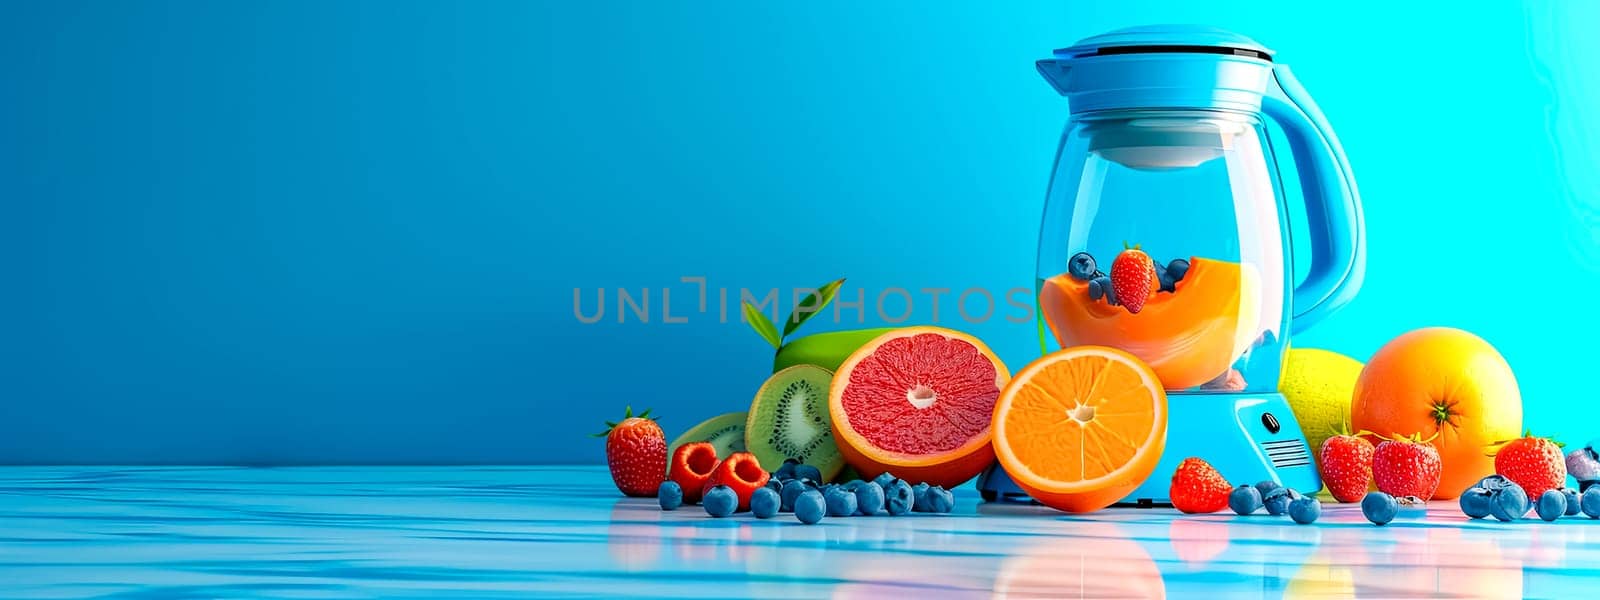 blender surrounded by an array of fresh fruits like oranges, strawberries, kiwi, and blueberries on a reflective surface with a bright blue background, copy space